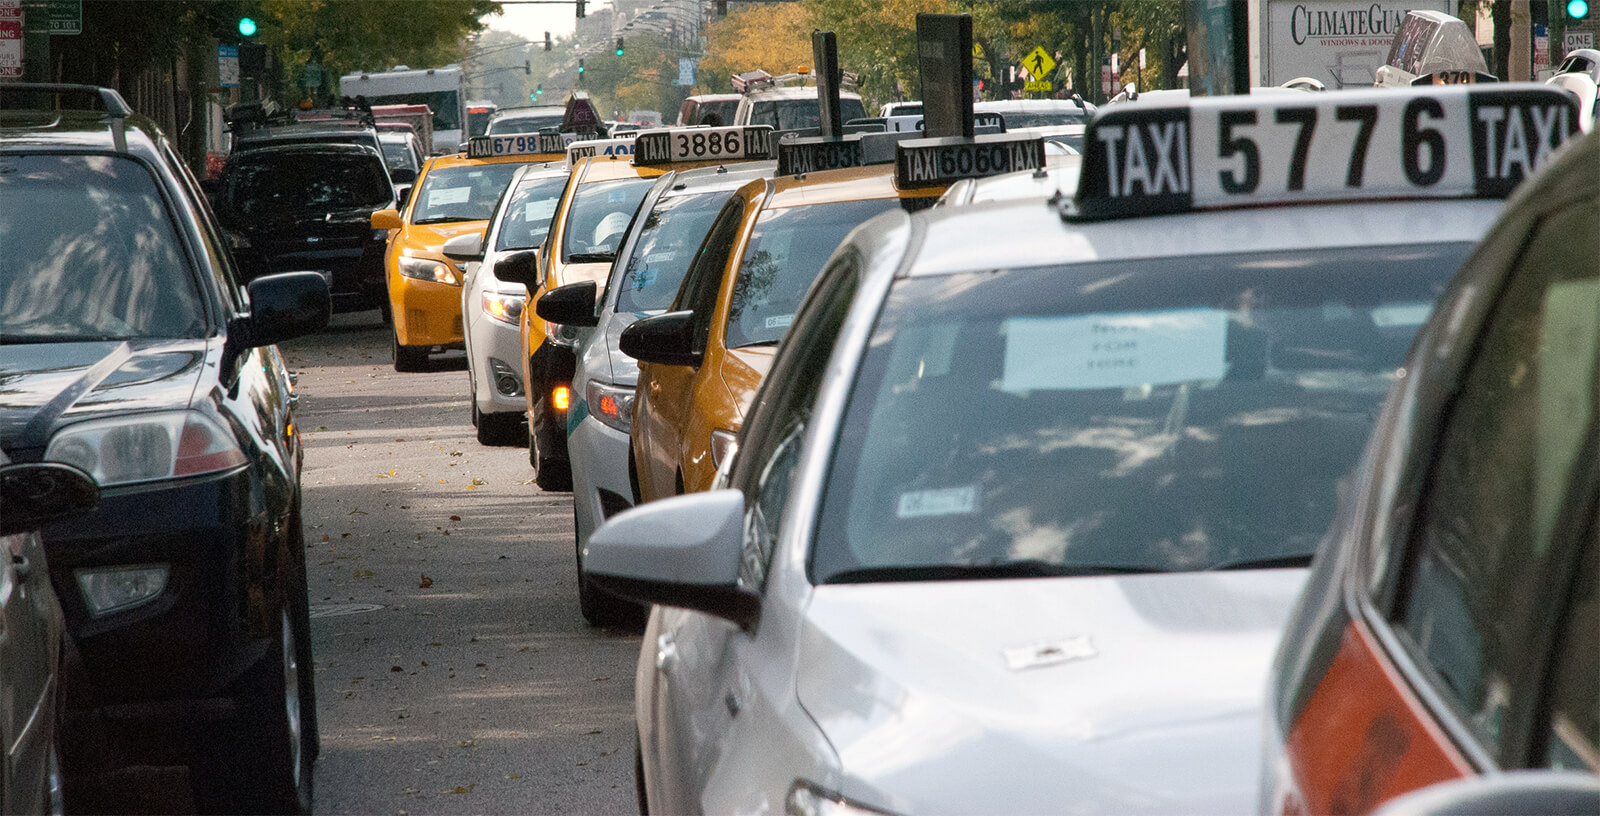 AFSCME Offers Solutions to Struggling Chicago Cabbies